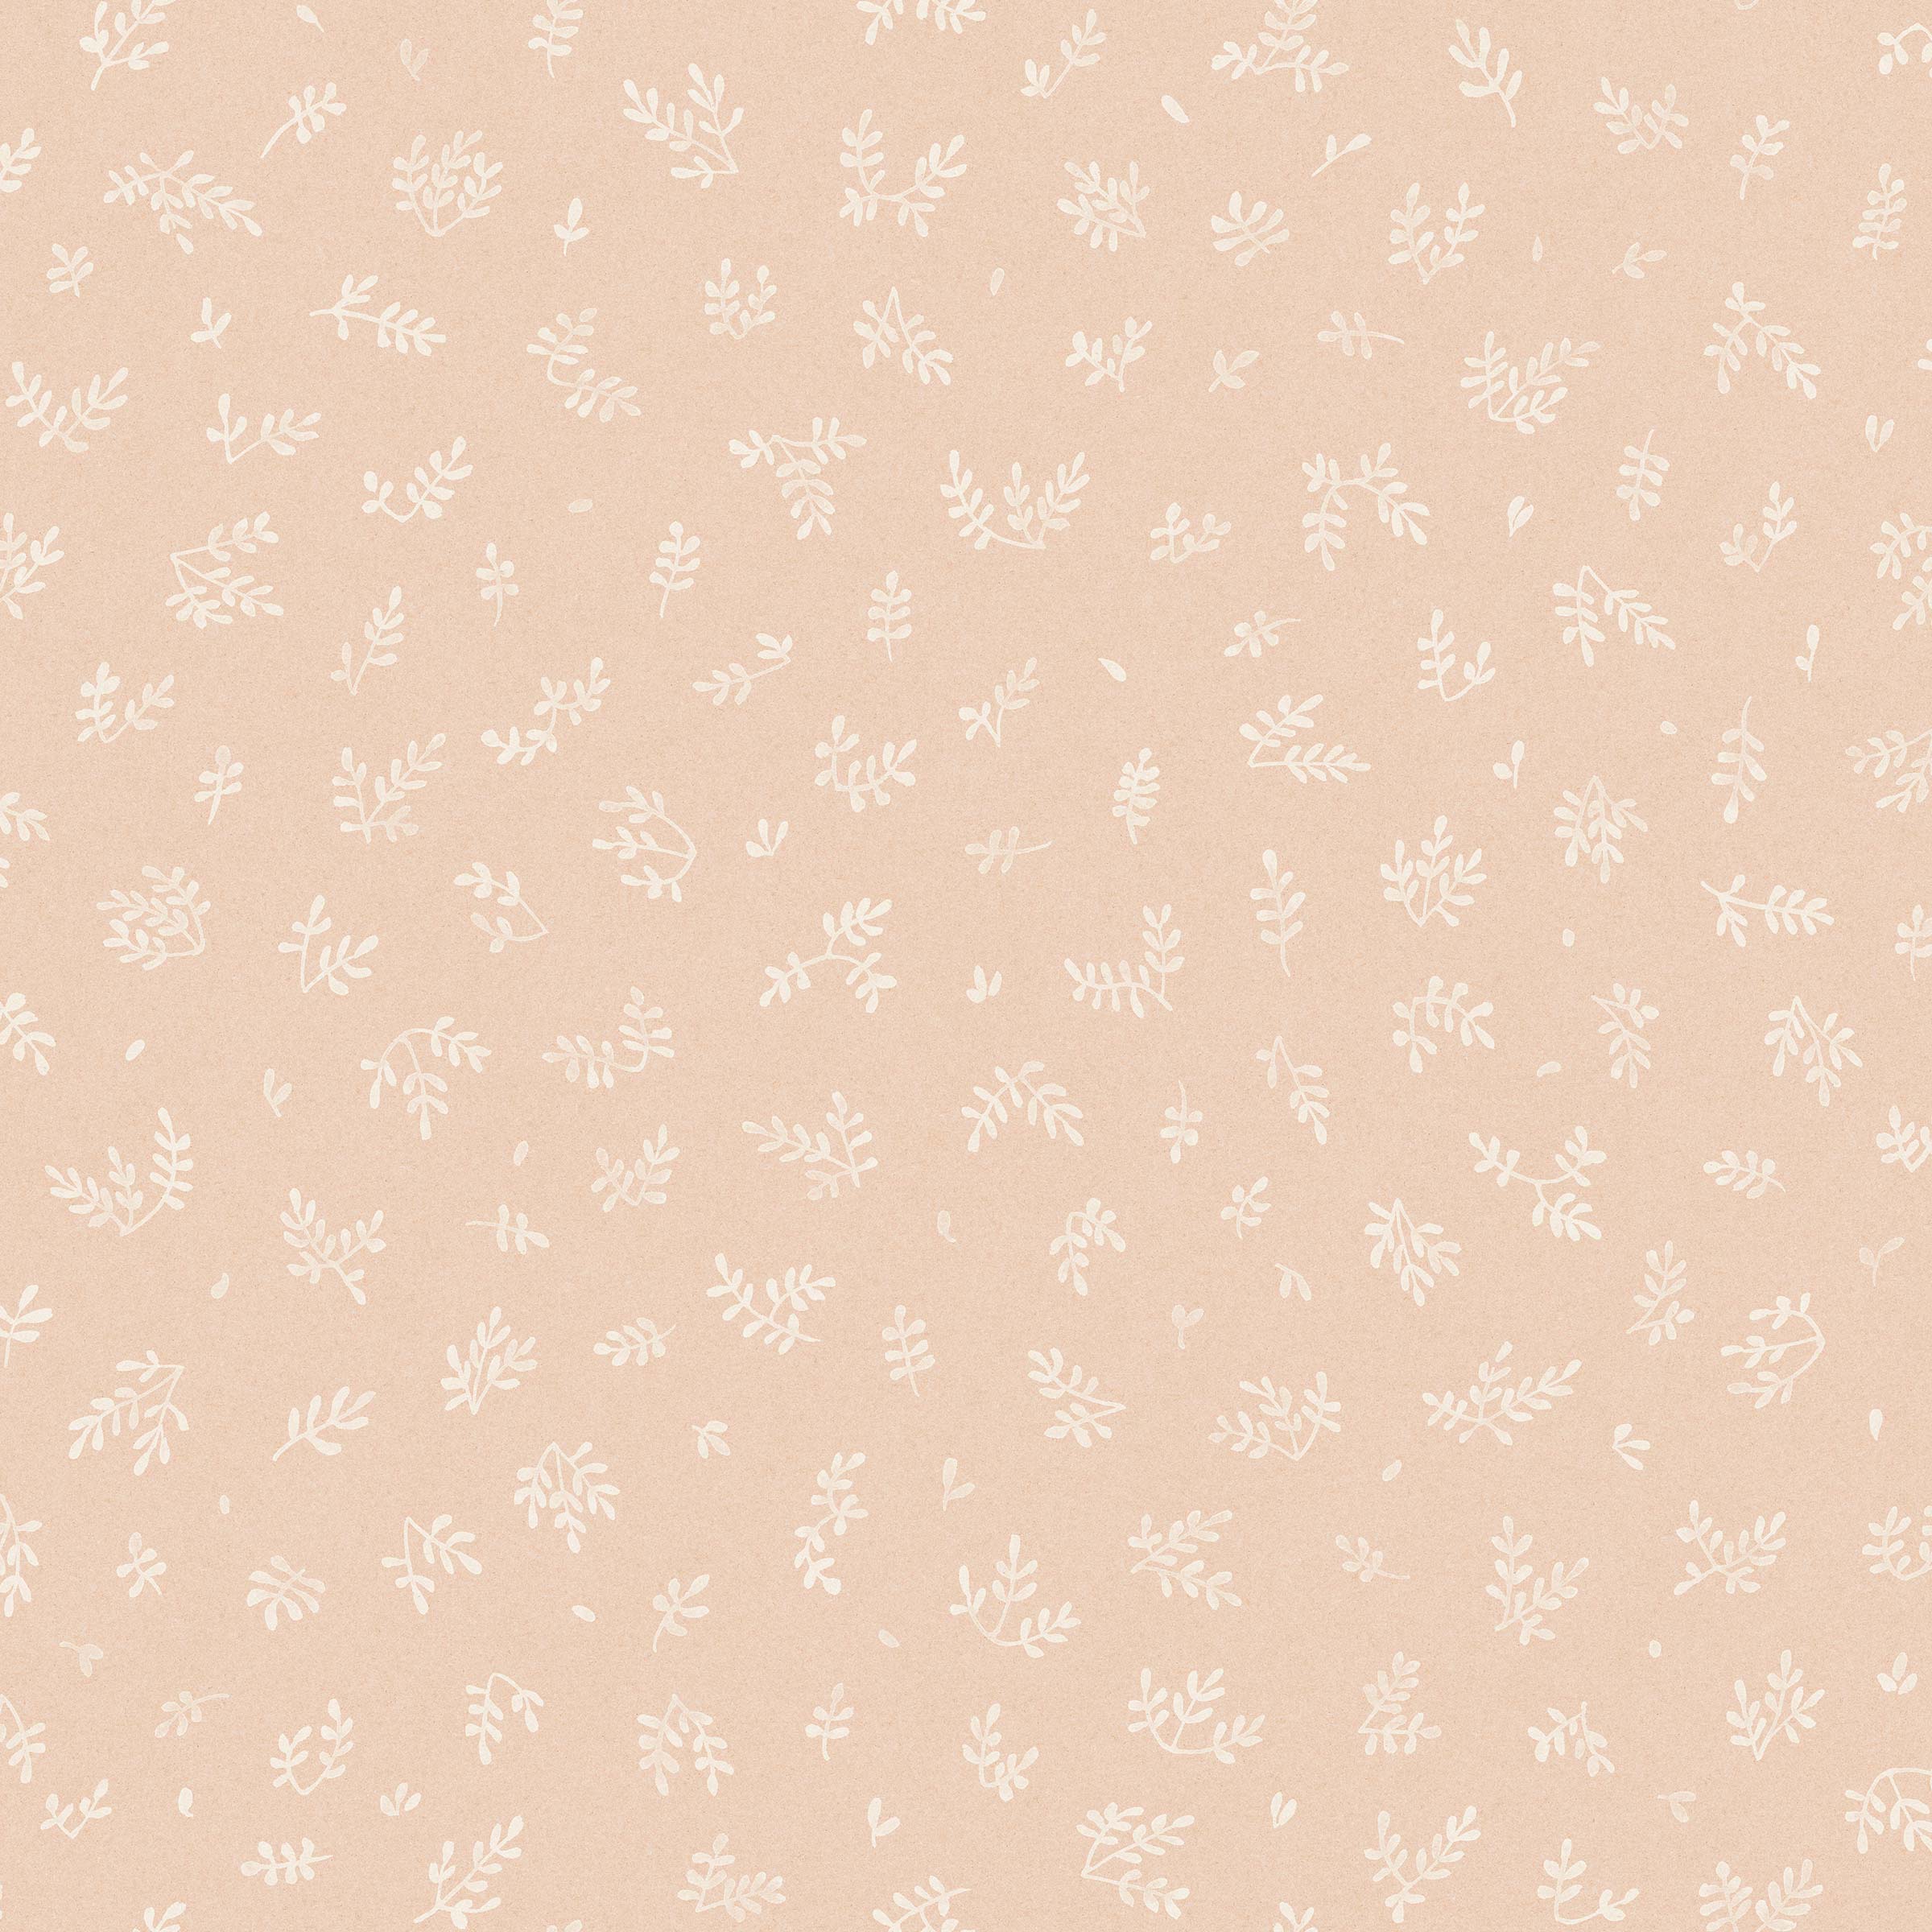 Detail of wallpaper in a minimal repeating leaf print in cream on a light pink field.